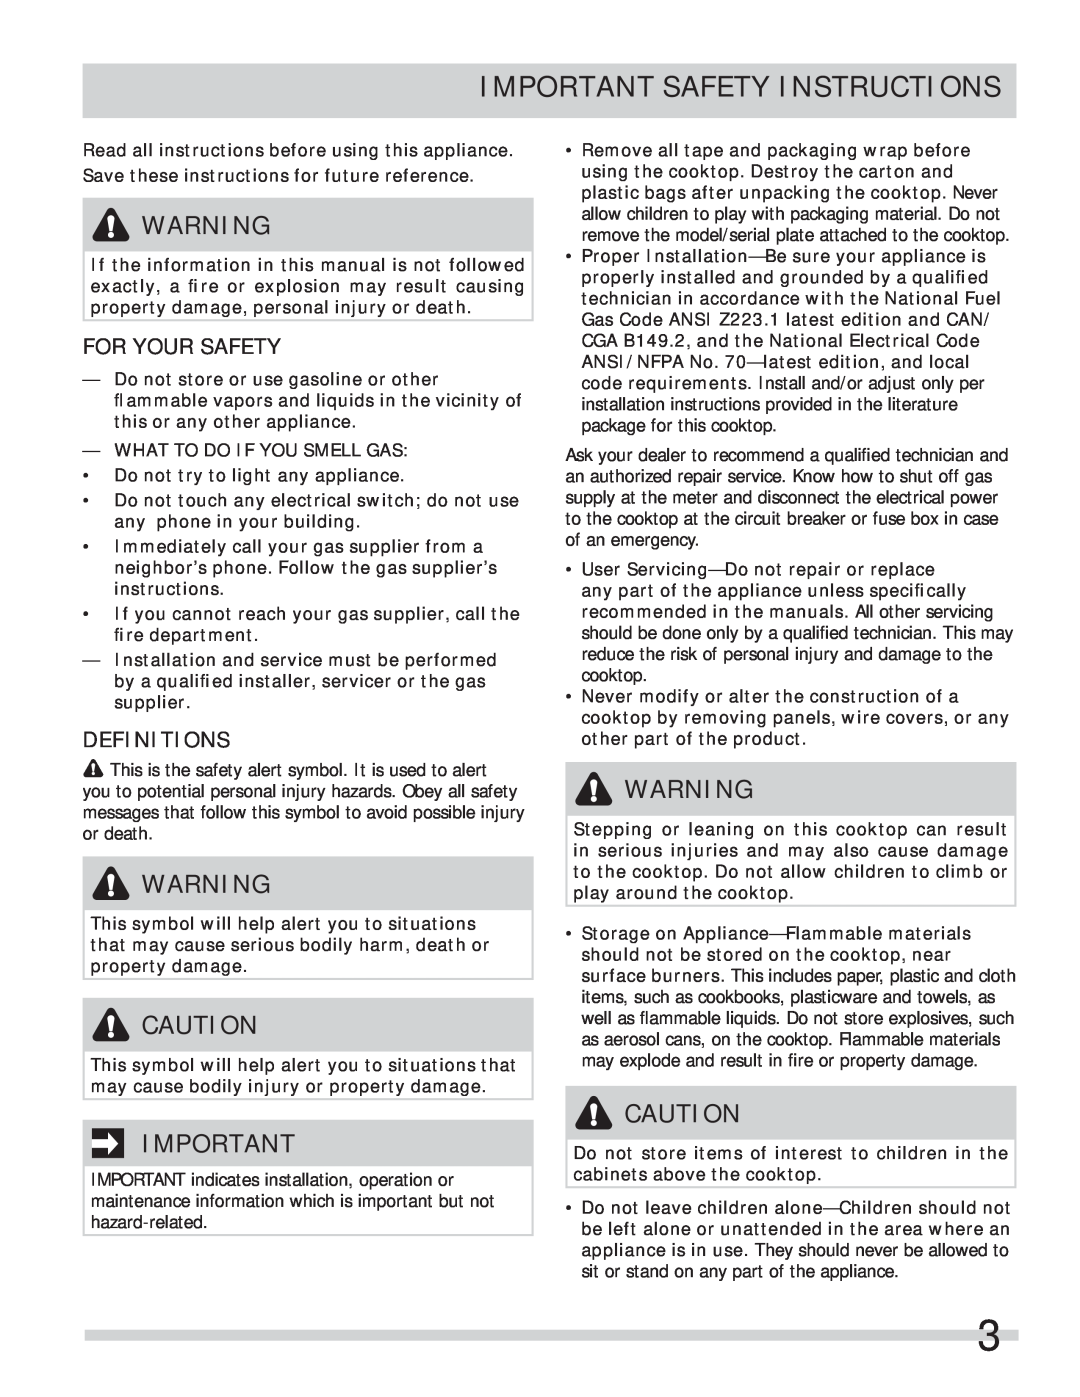 Frigidaire A01704501 important safety instructions Important Safety Instructions, For Your Safety, Definitions 